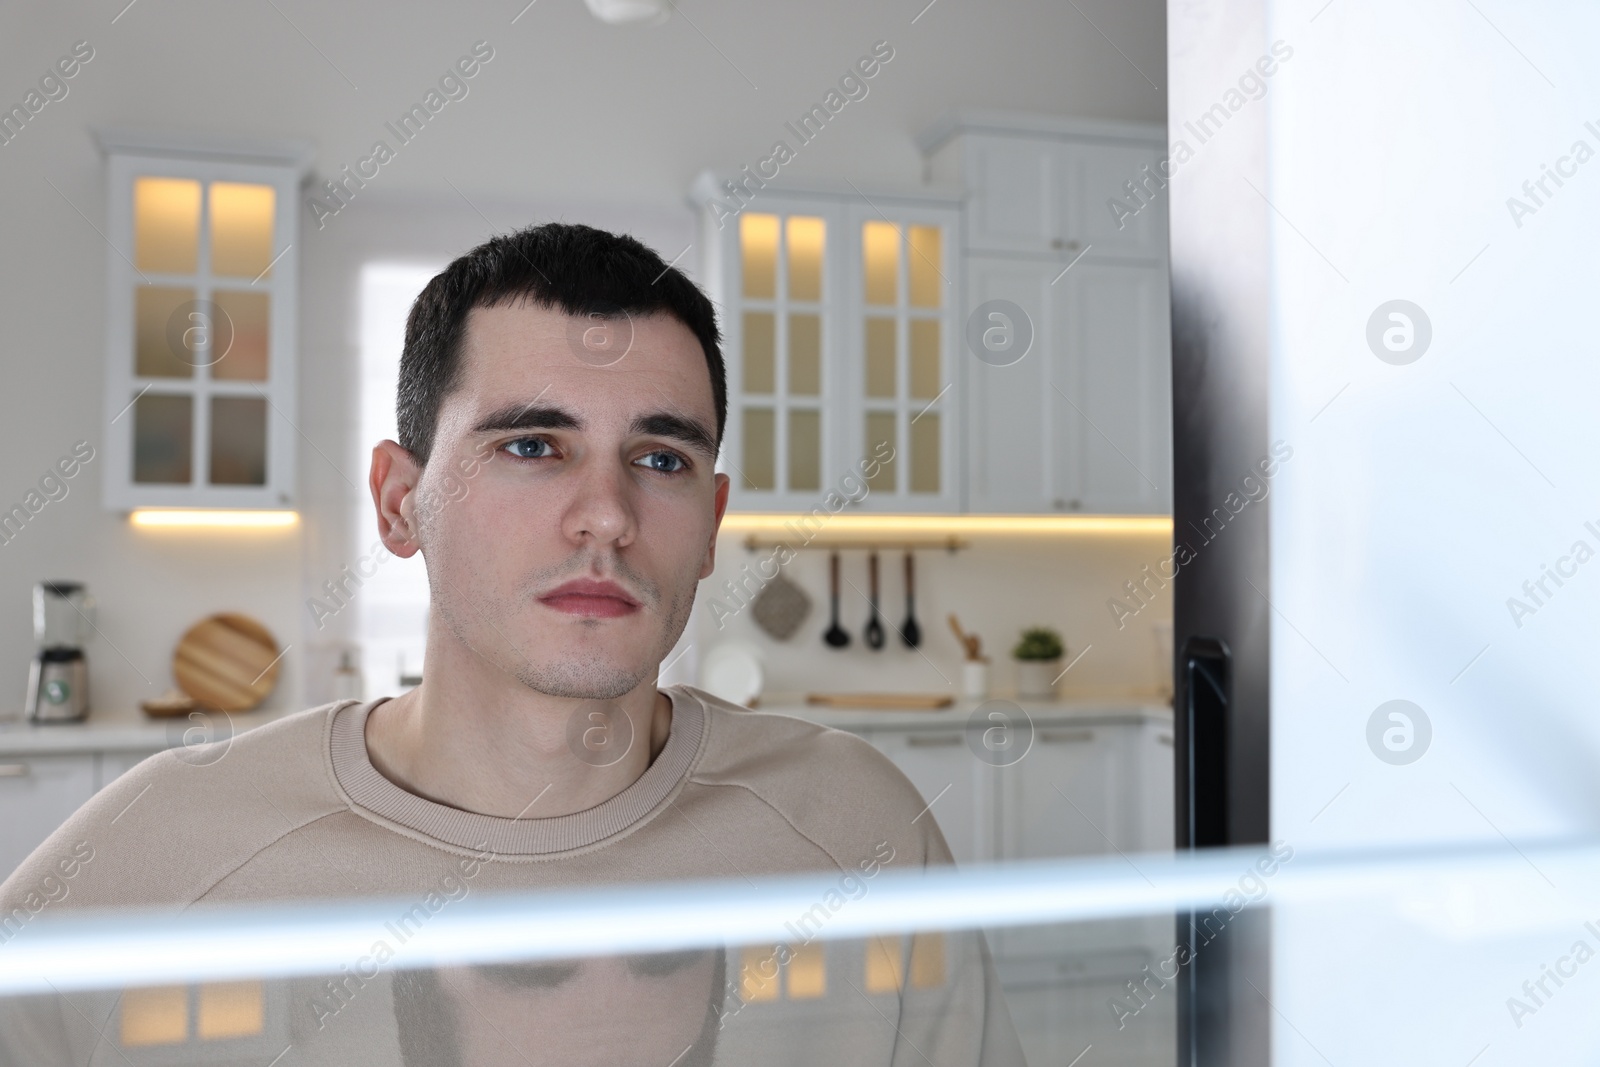 Photo of Upset man near empty refrigerator in kitchen, view from inside